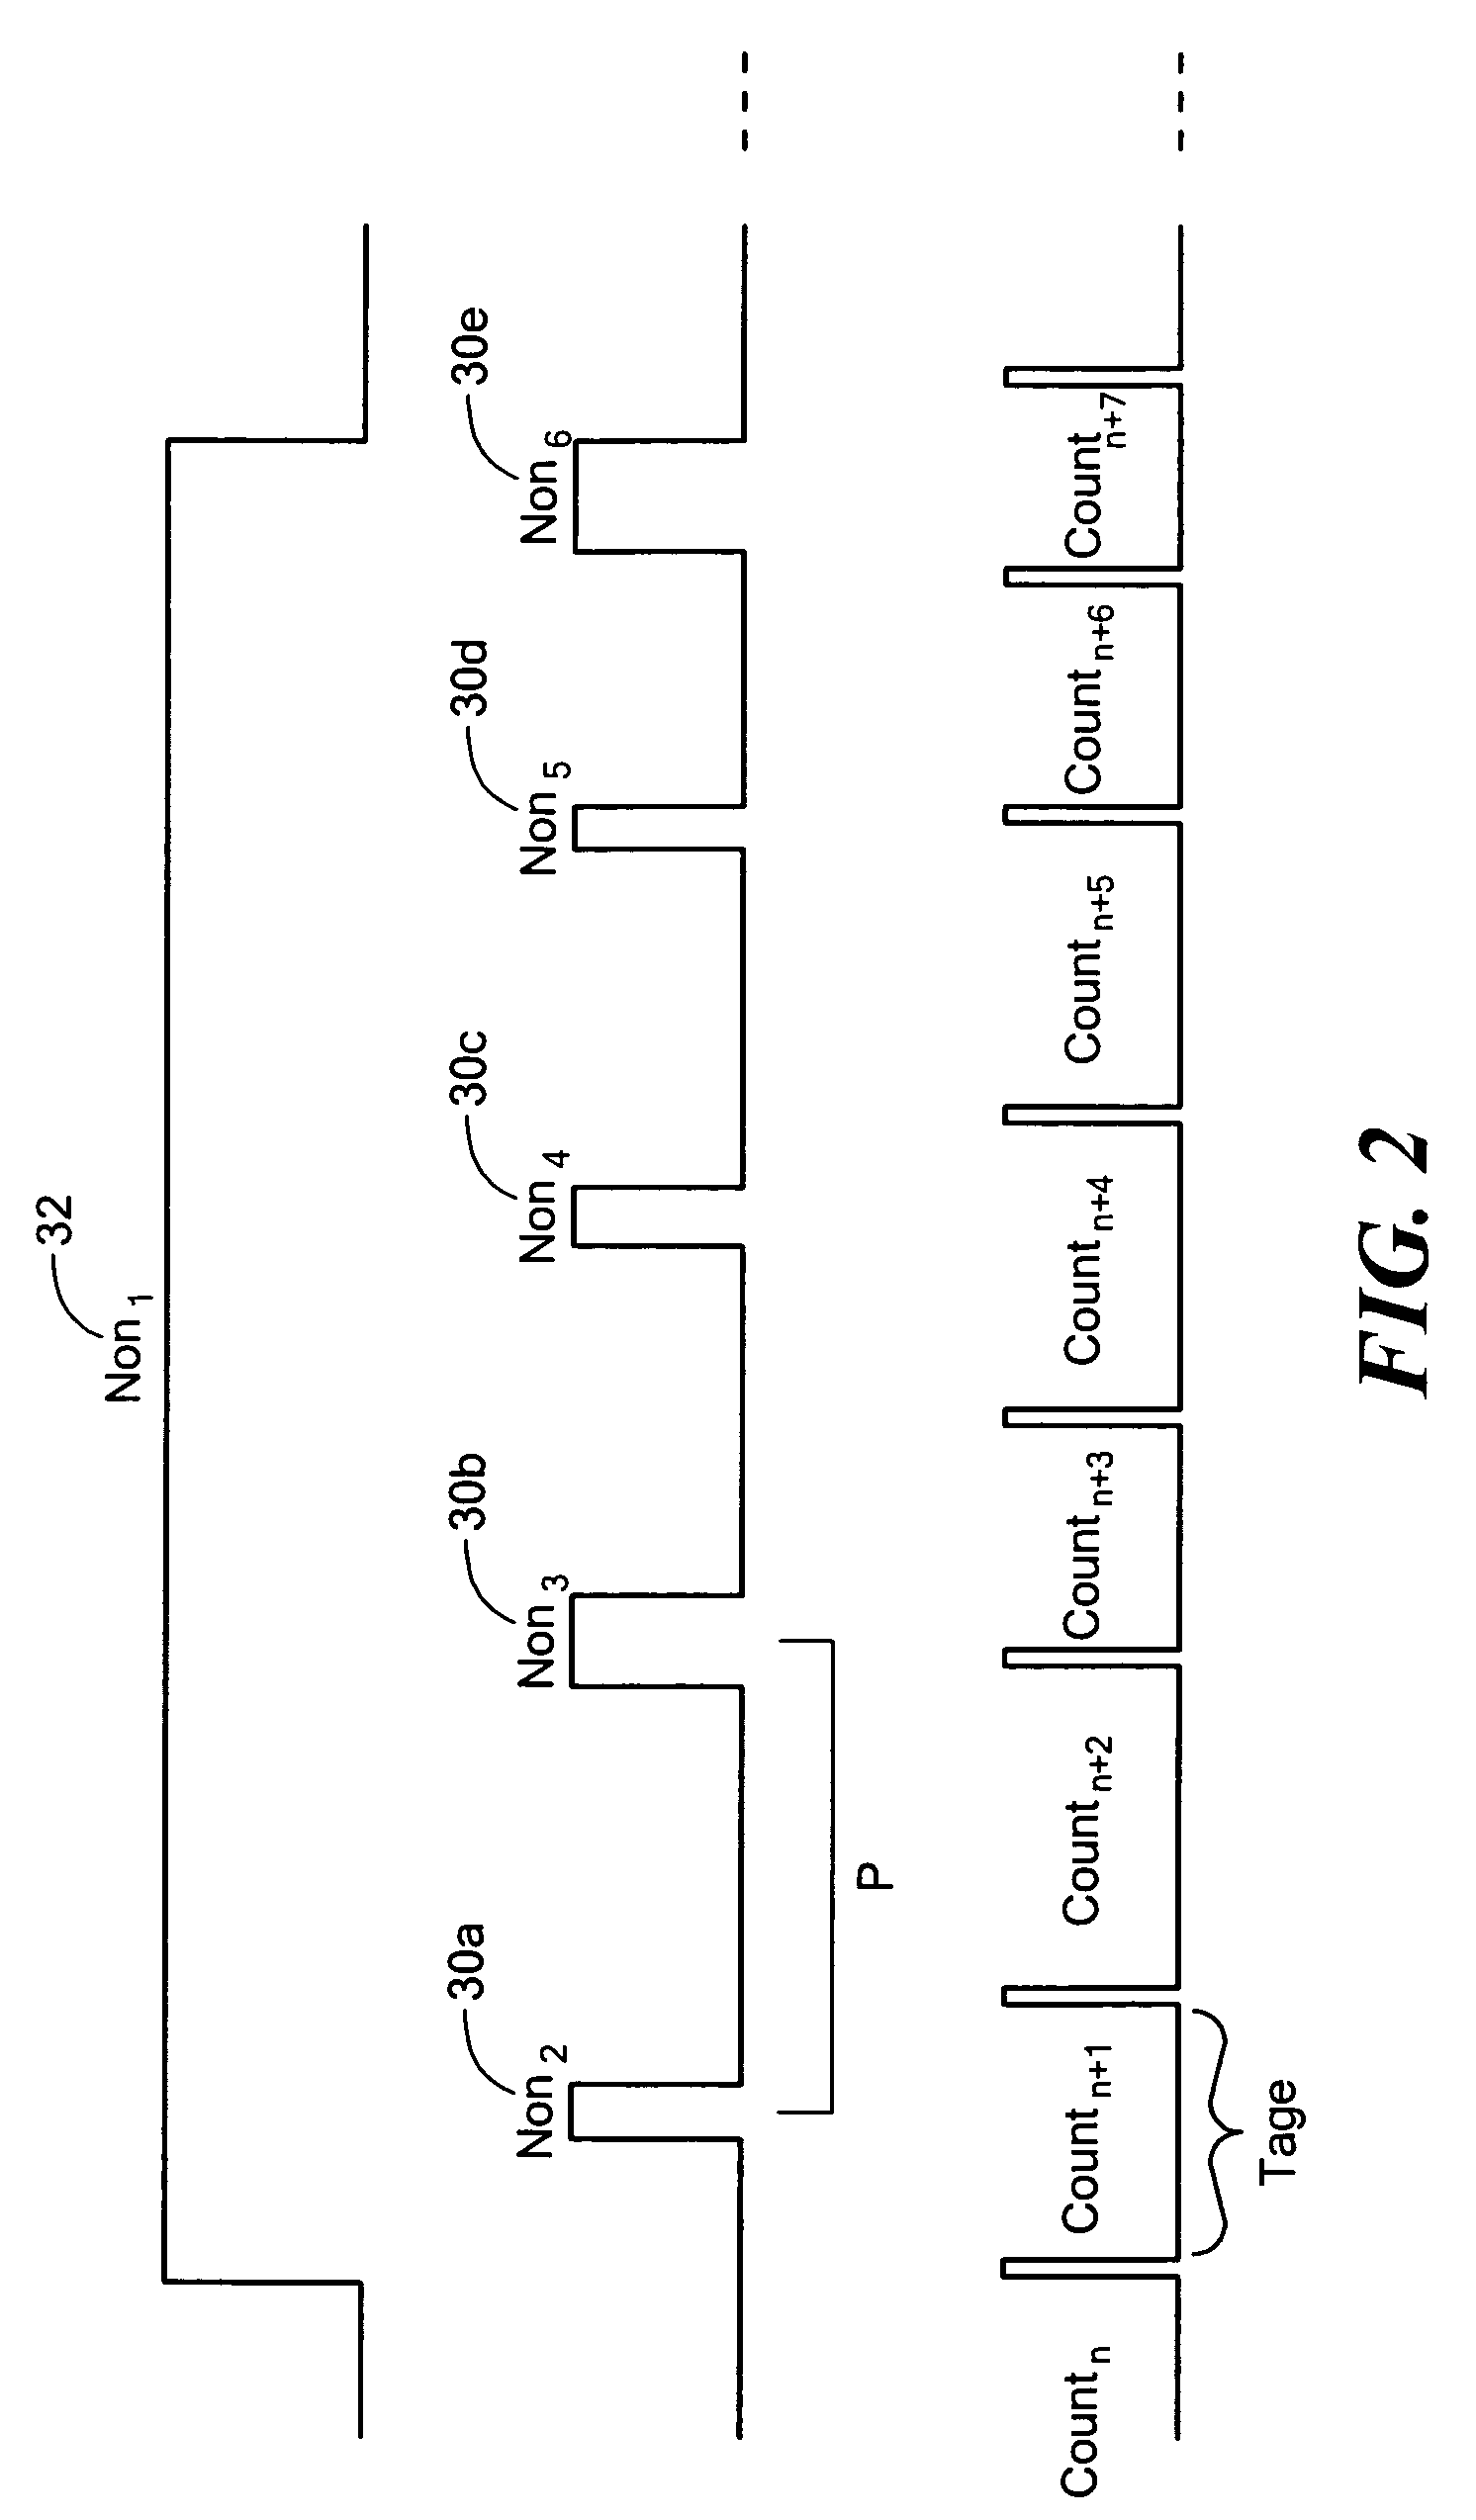 Duty cycle estimation system and method